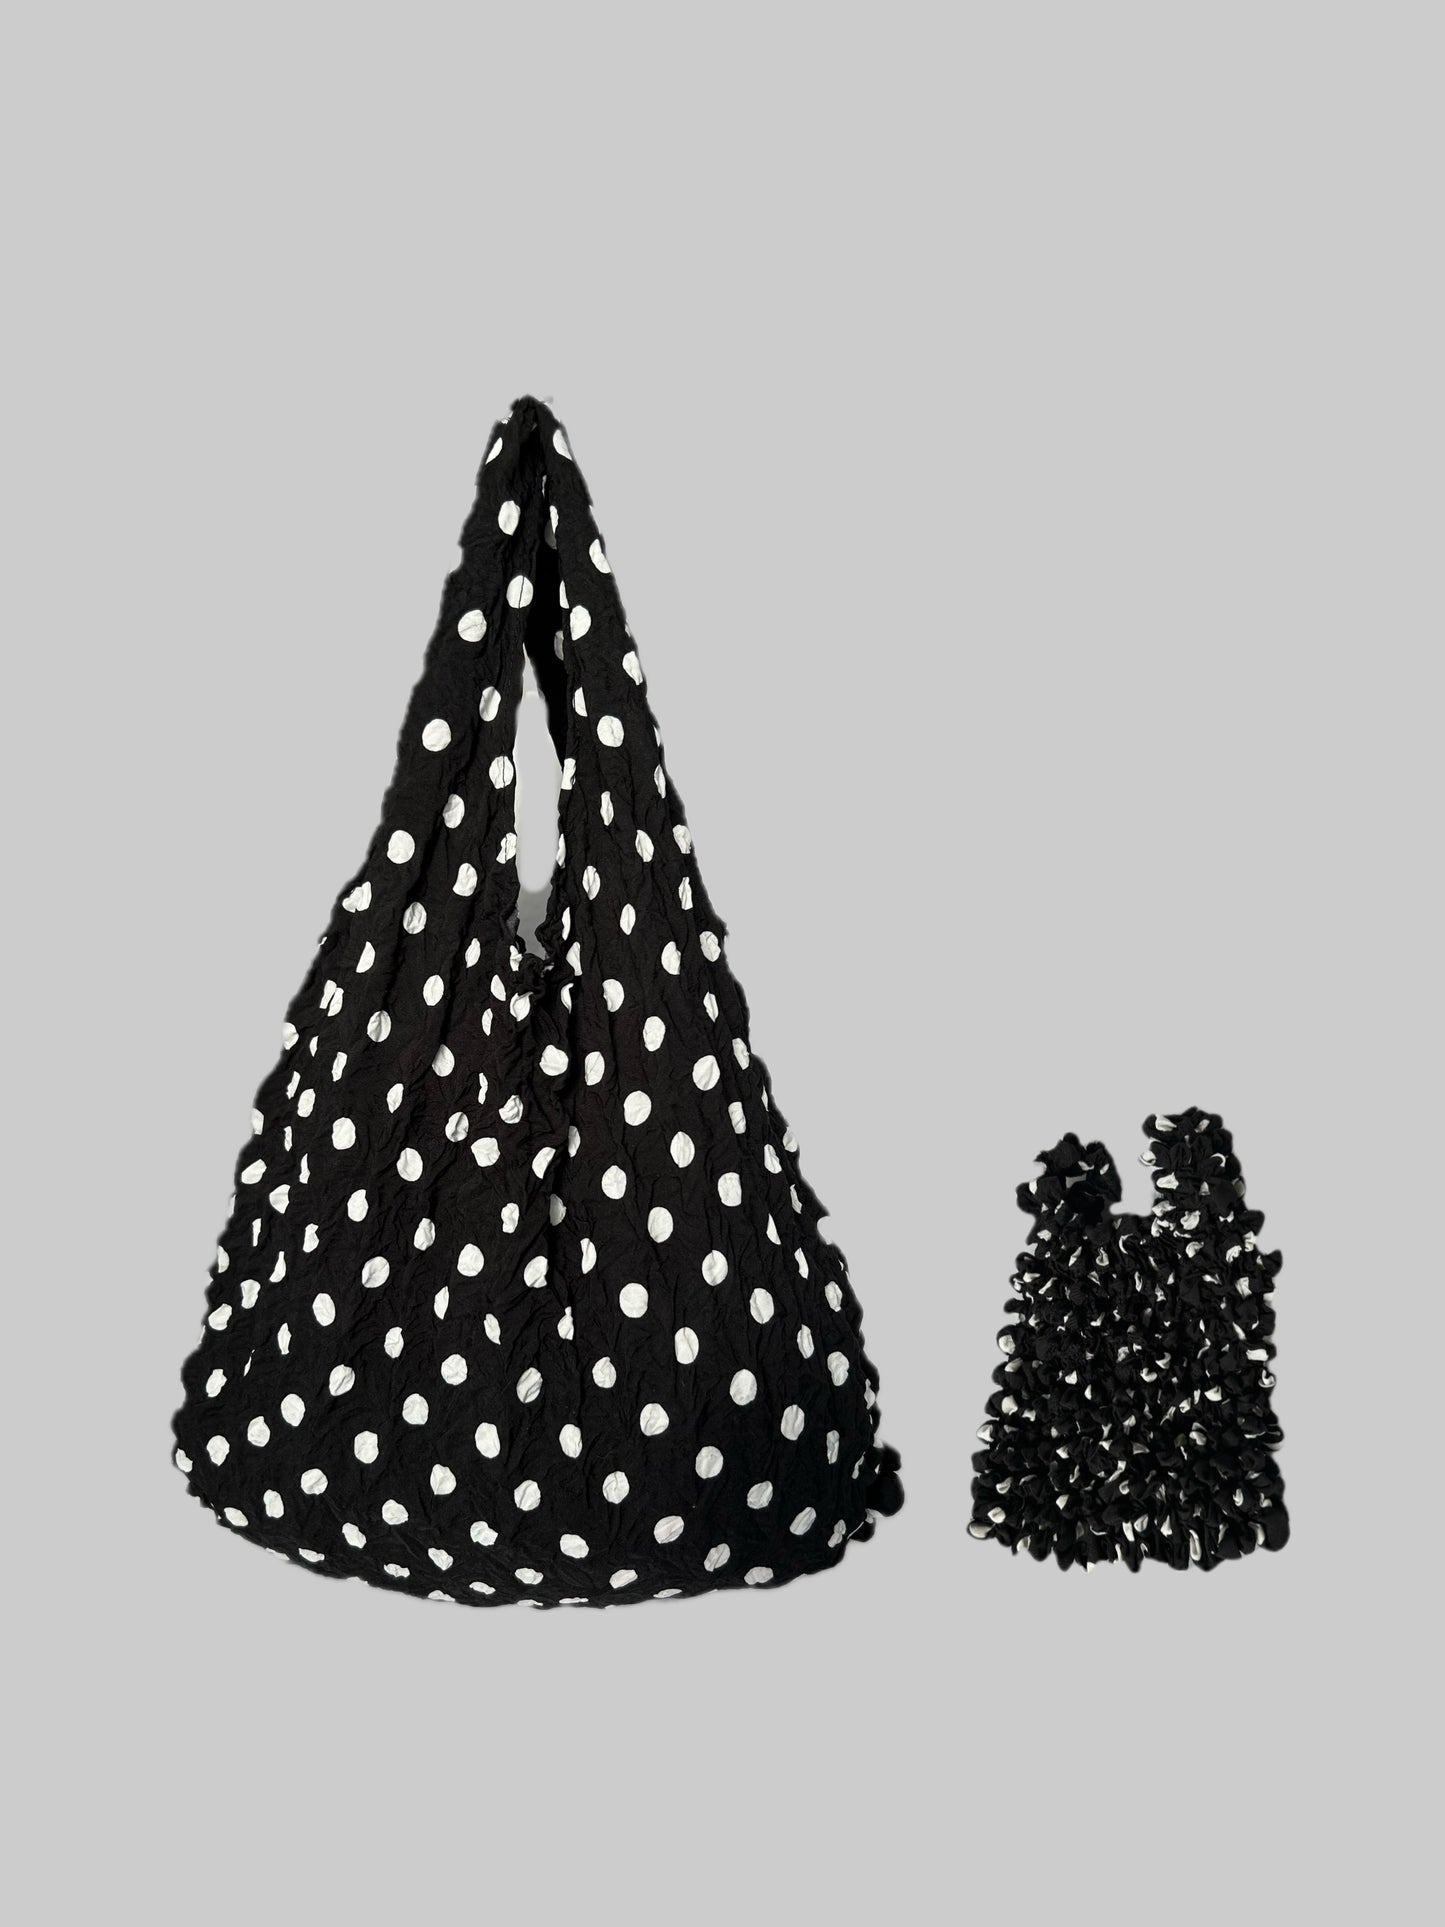 Black and white polka dots Floral printe Foldable Reusable grocery shopping bag-flex totes 